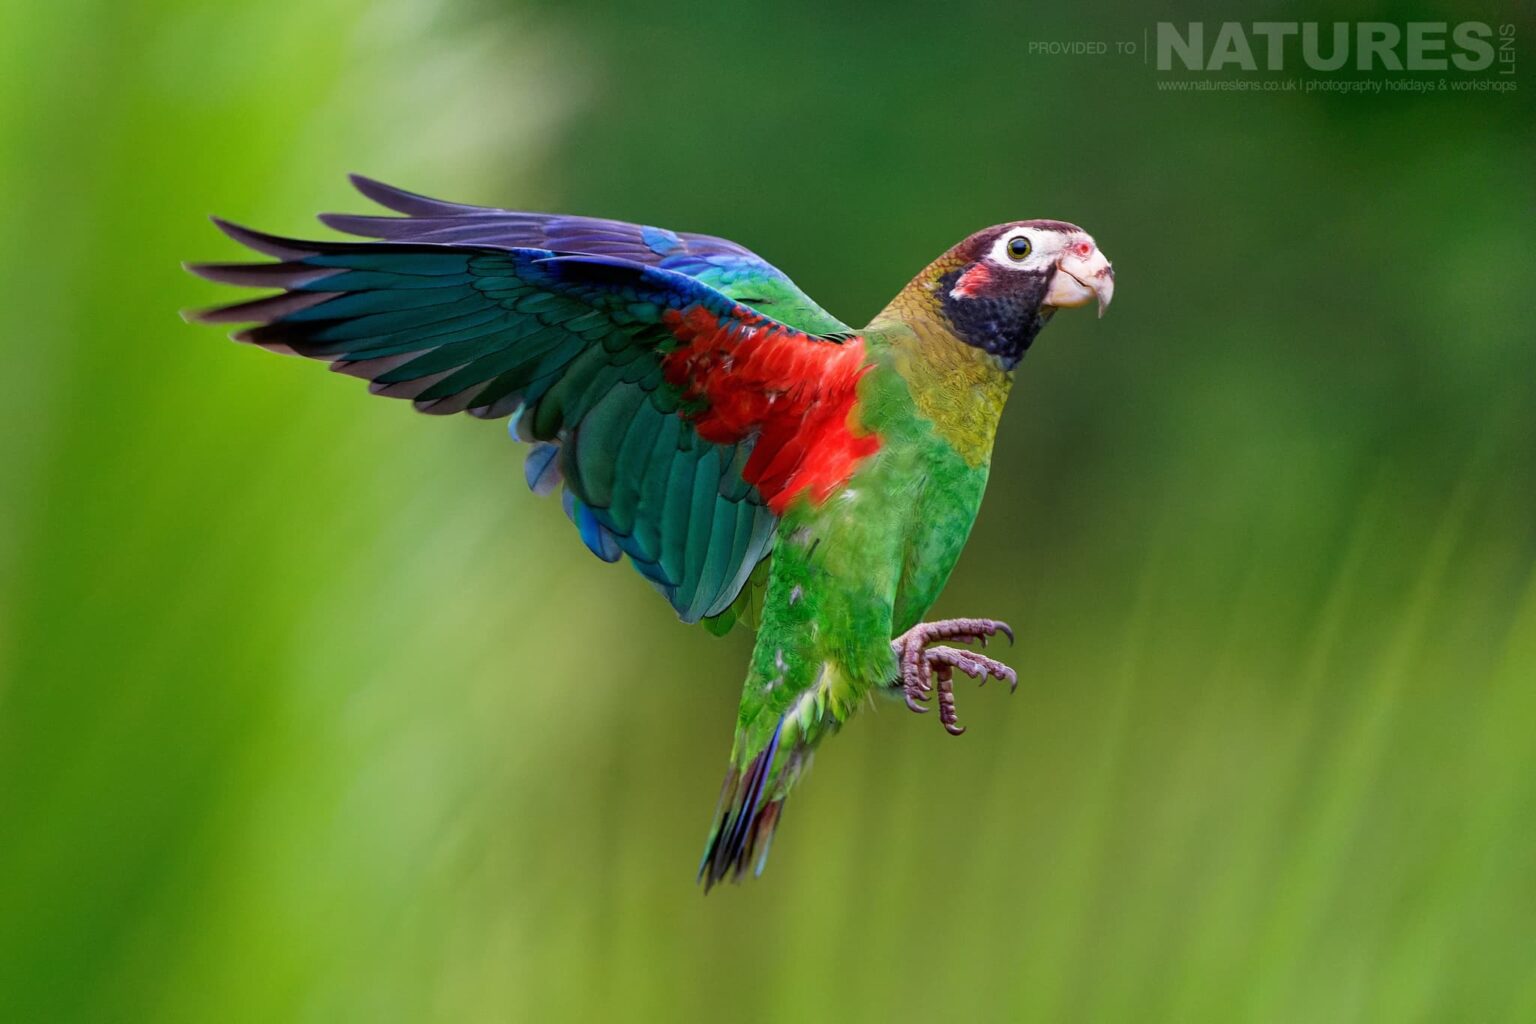 A Brown Parrot in flight - which can be photographed during the NaturesLens Quetzals & Other Iconic Wildlife of Costa Rica photography holiday